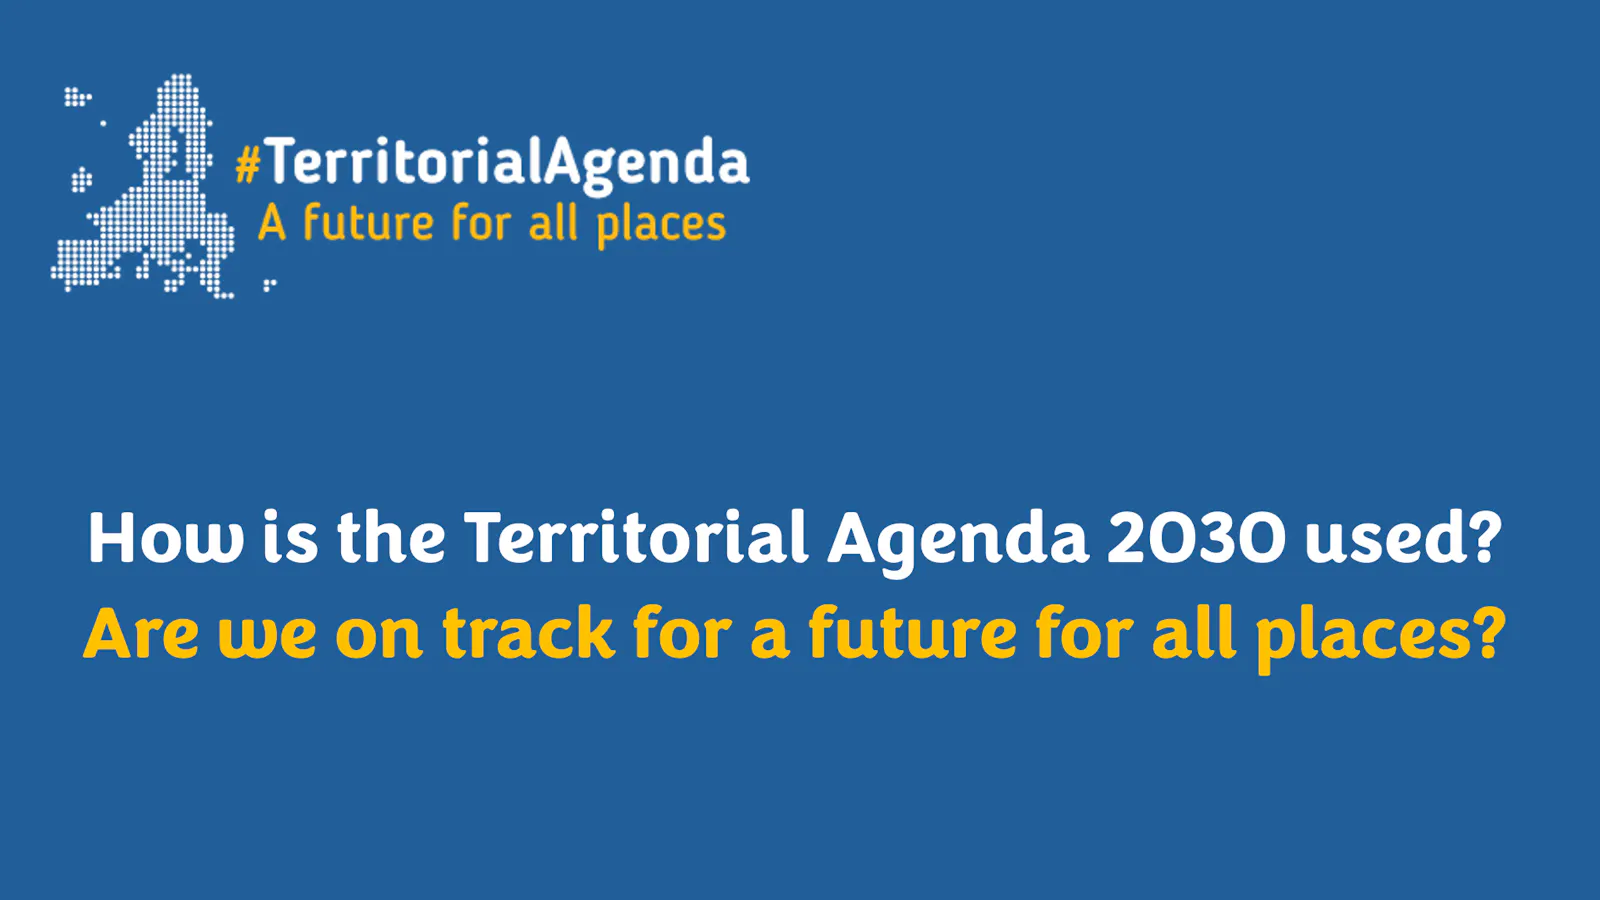 #TerritorialAgenda: Are we on track for a future for all places?